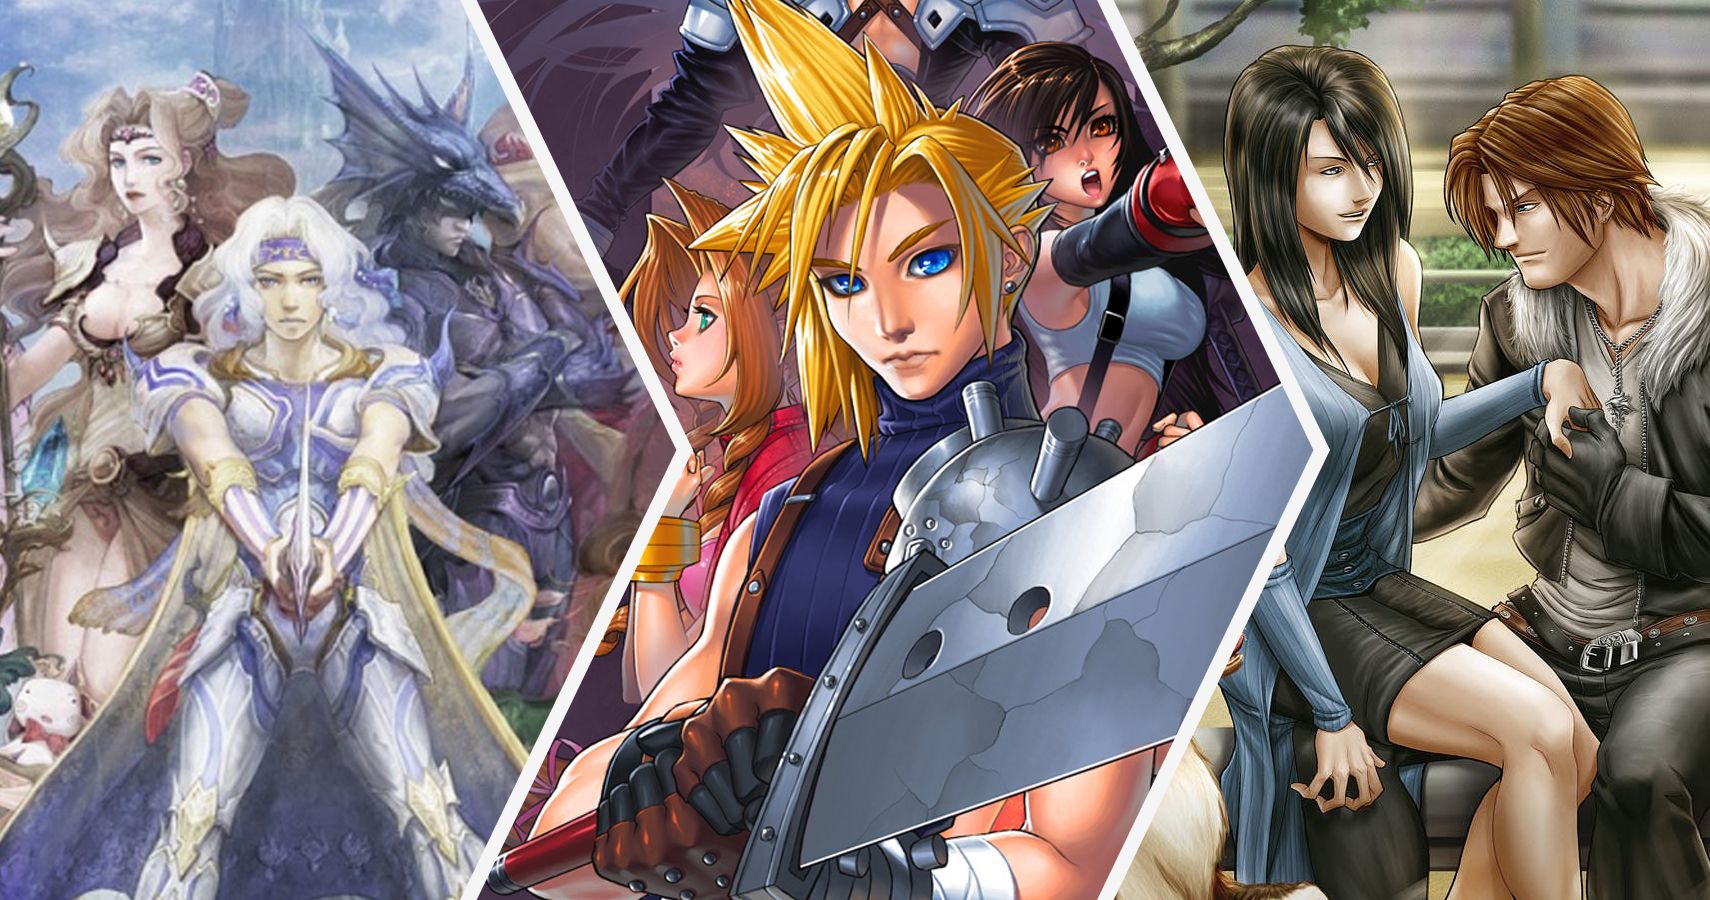 10 Best Square Enix Games Ranked - KeenGamer